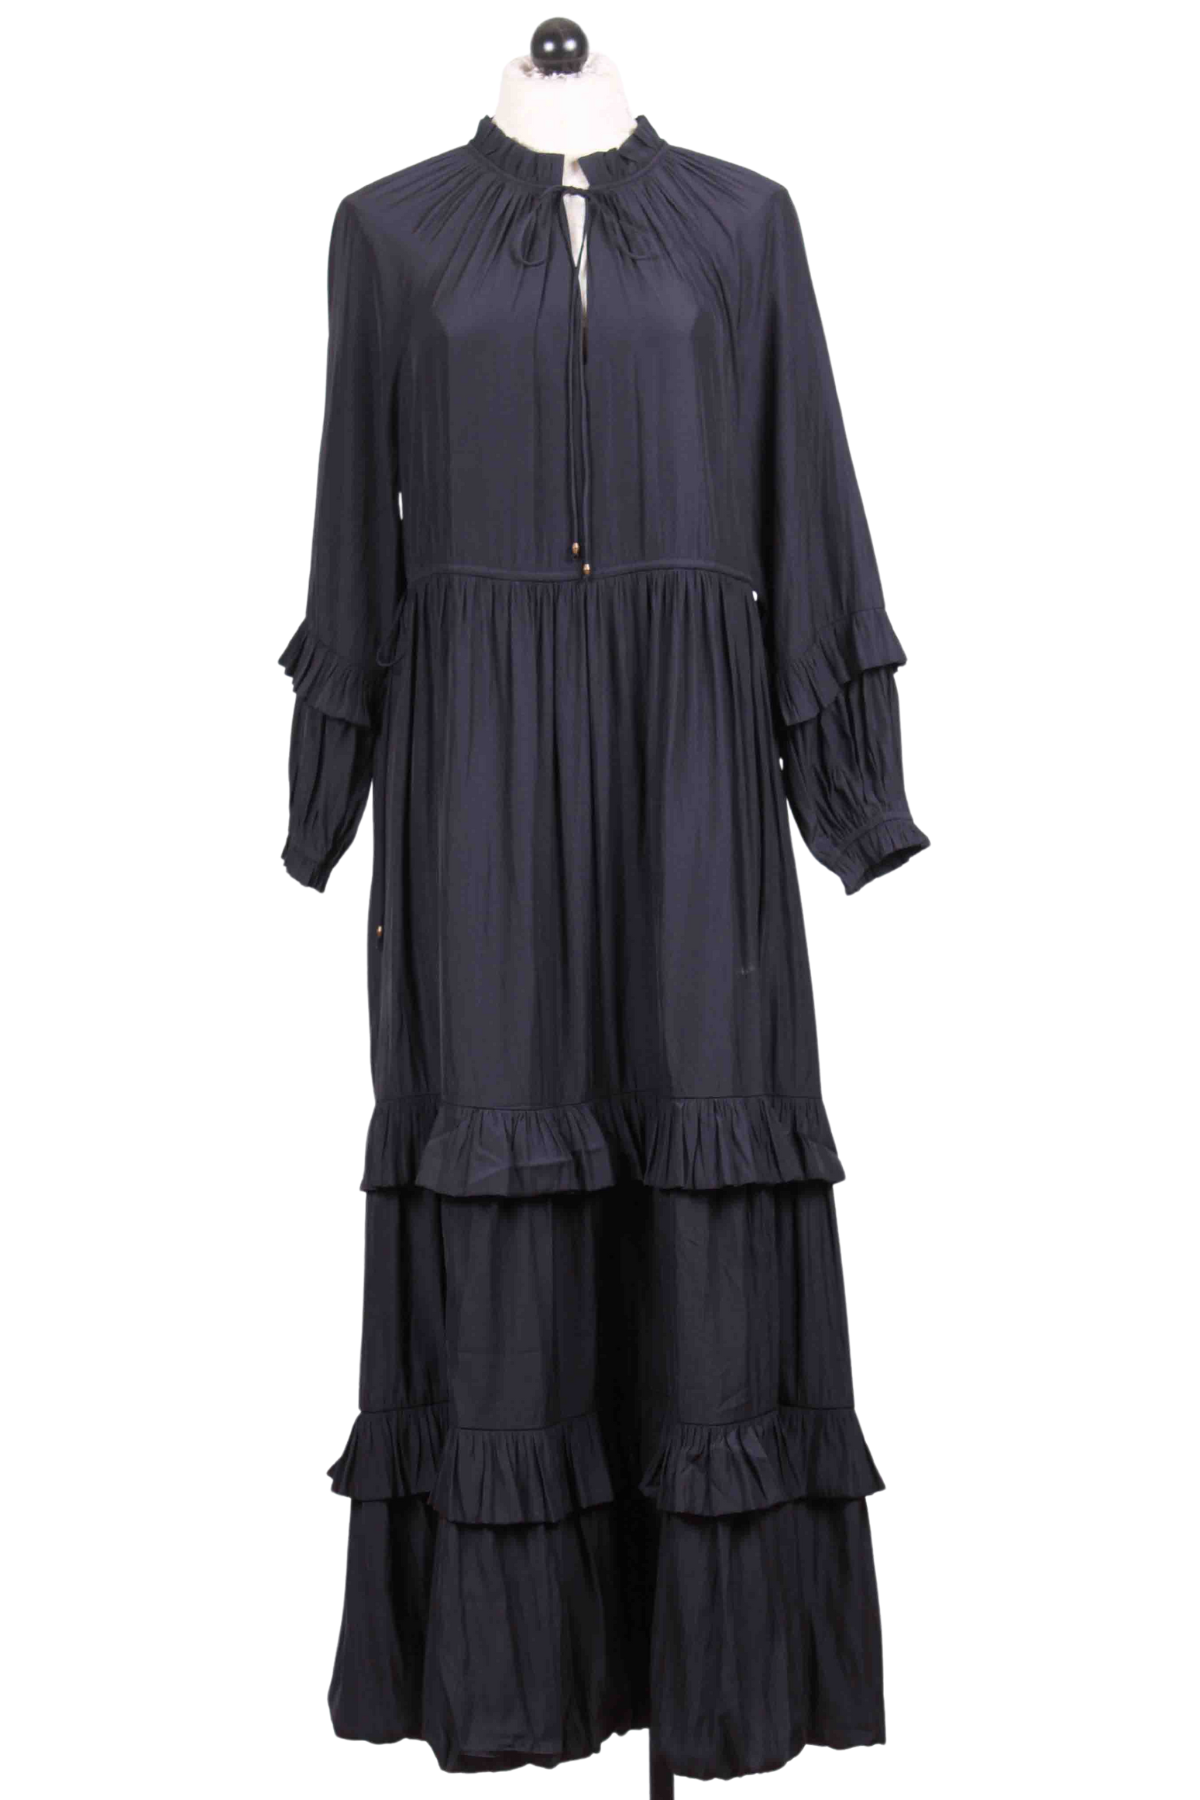 Midnight Cove Maxi Dress by Marie Oliver